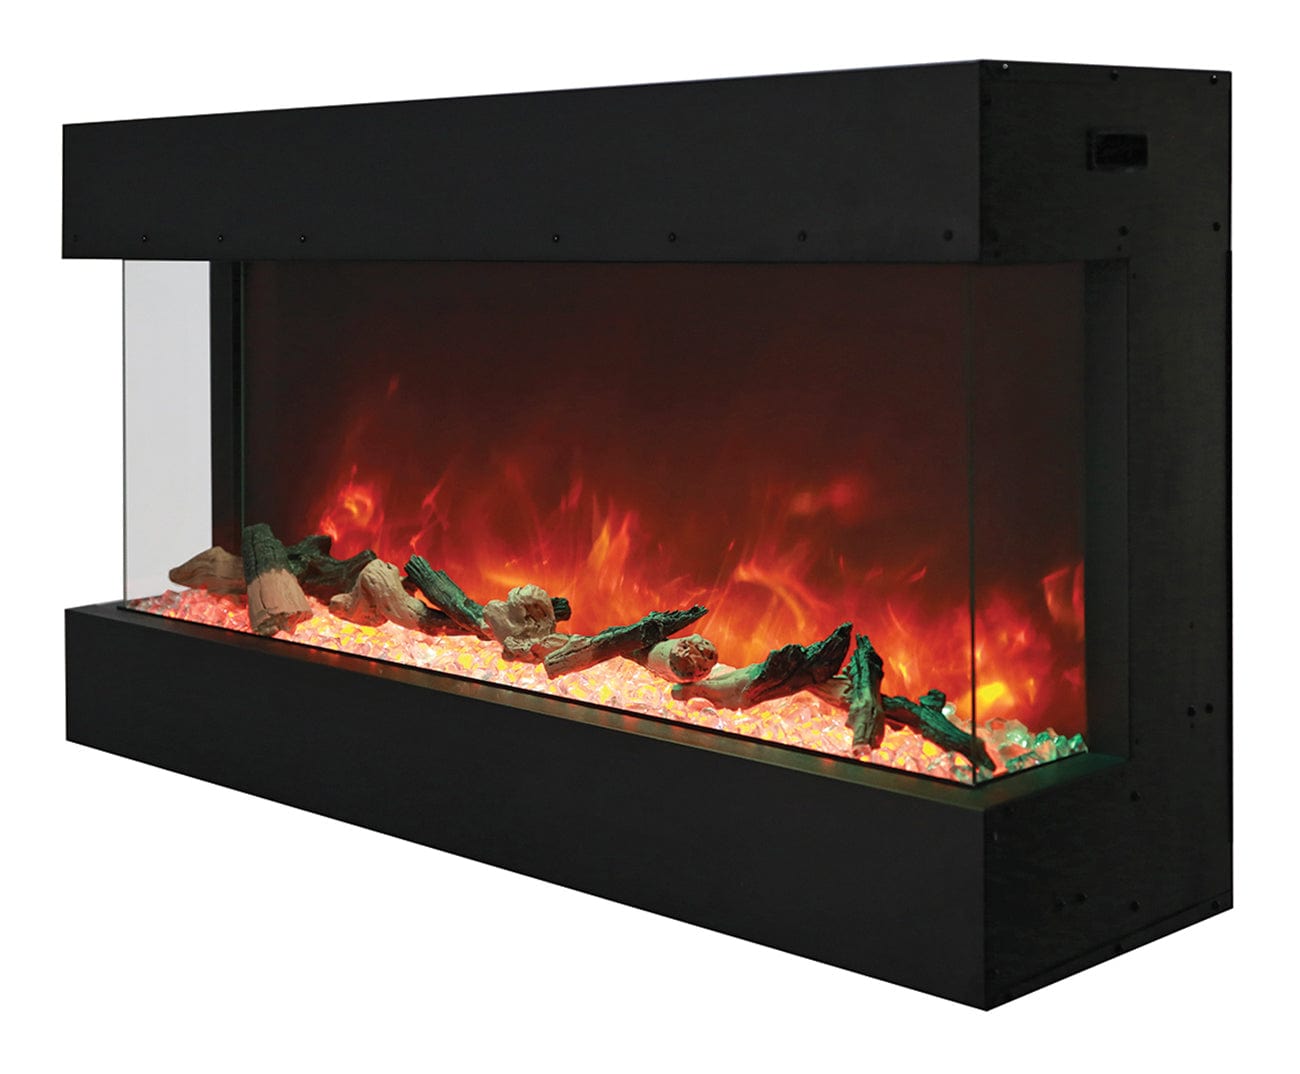 Remii Electric Fireplace Remii - 60-Bay-SLIM – 3 Sided Glass Electric Fireplace 60-BAY-SLIM Remii 60-Bay-SLIM – 3 Sided Electric Fireplace | FirePitsUSA.com